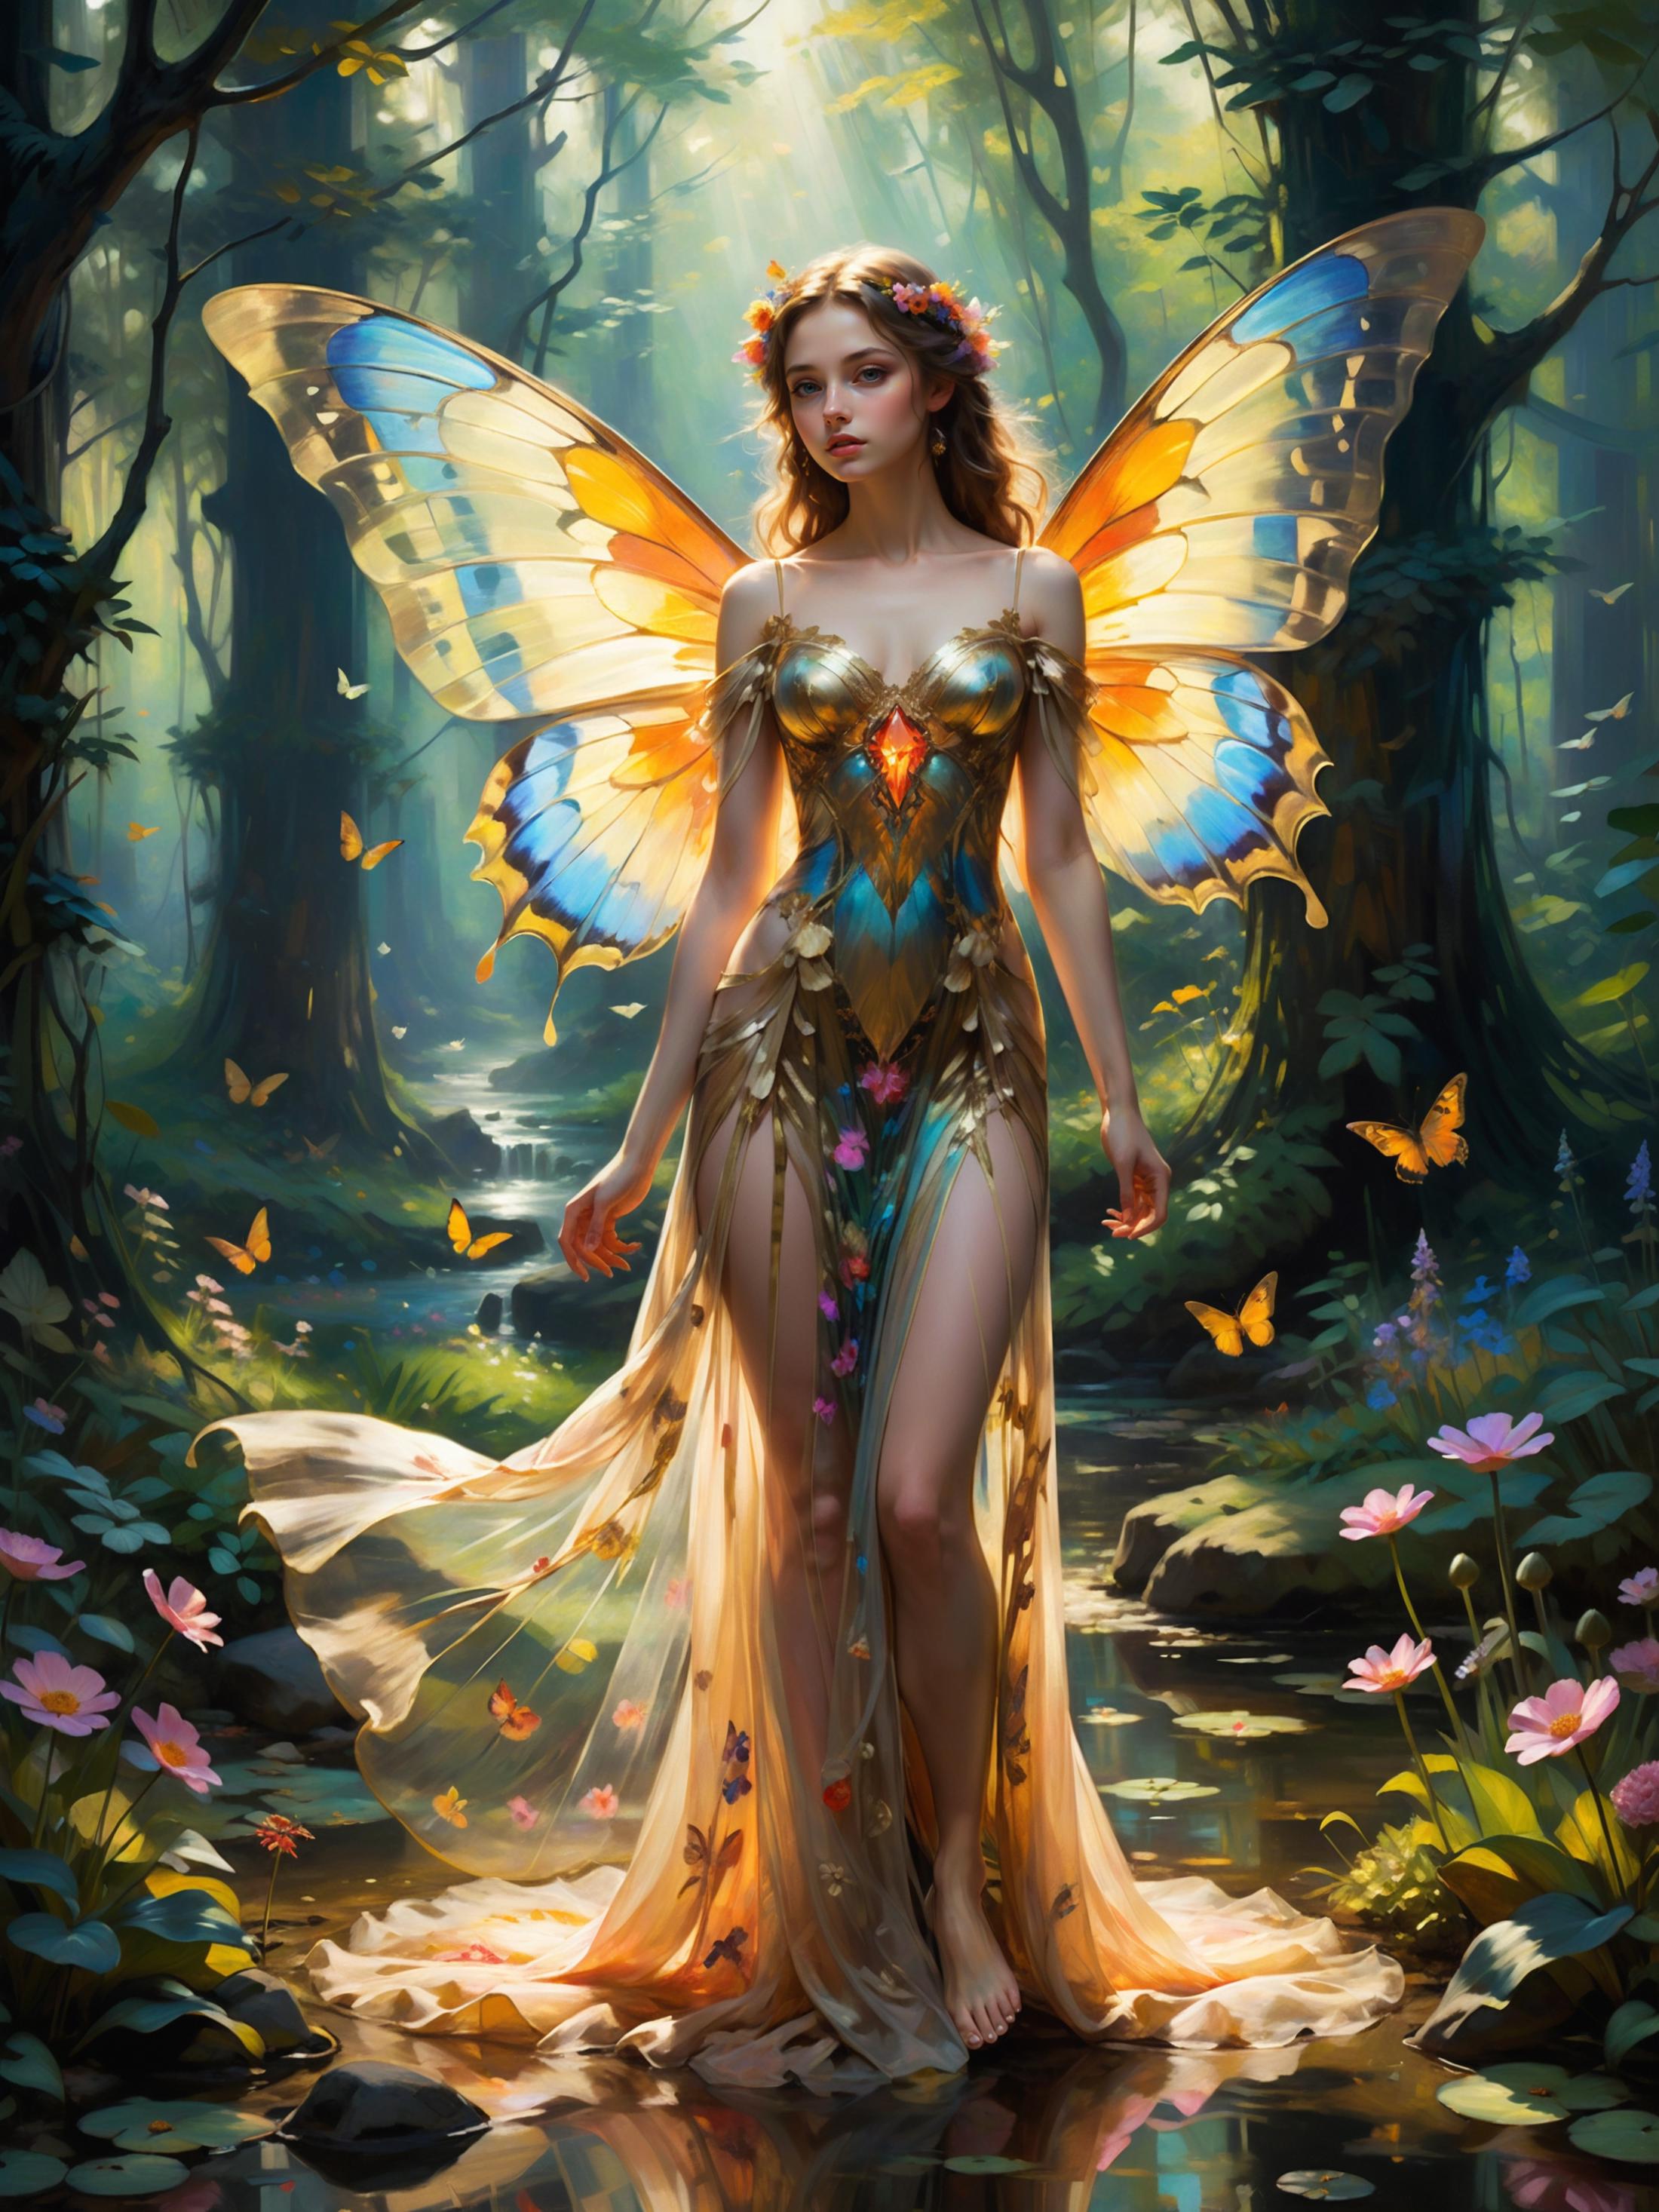 Fantasy Artwork of a Beautiful Fairy with Wings and a Dress.